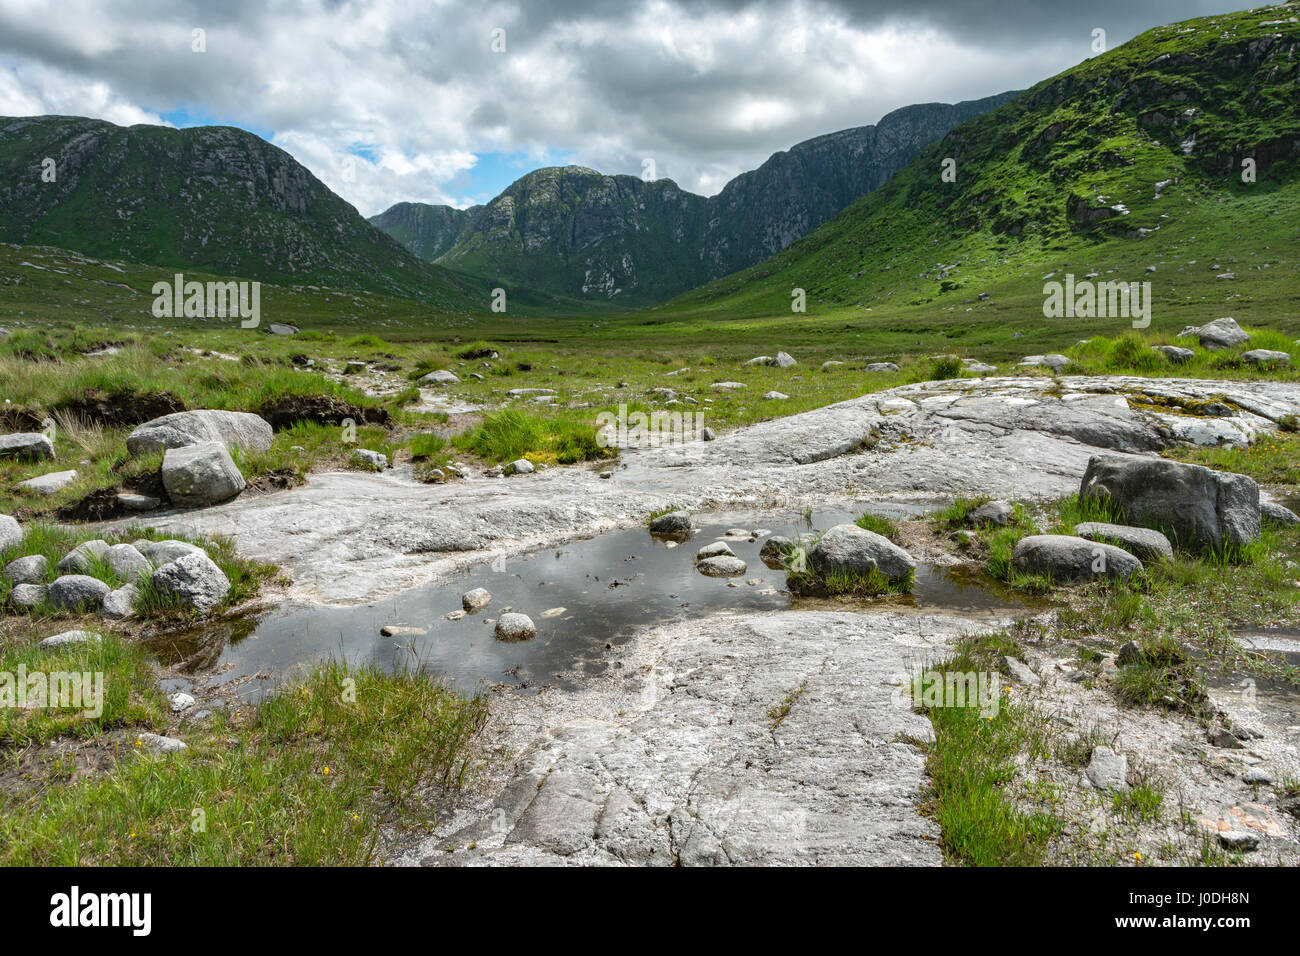 The Poisoned Glen and the peak of Crockfadda, Derryveagh Mountains, County Donegal, Ireland Stock Photo